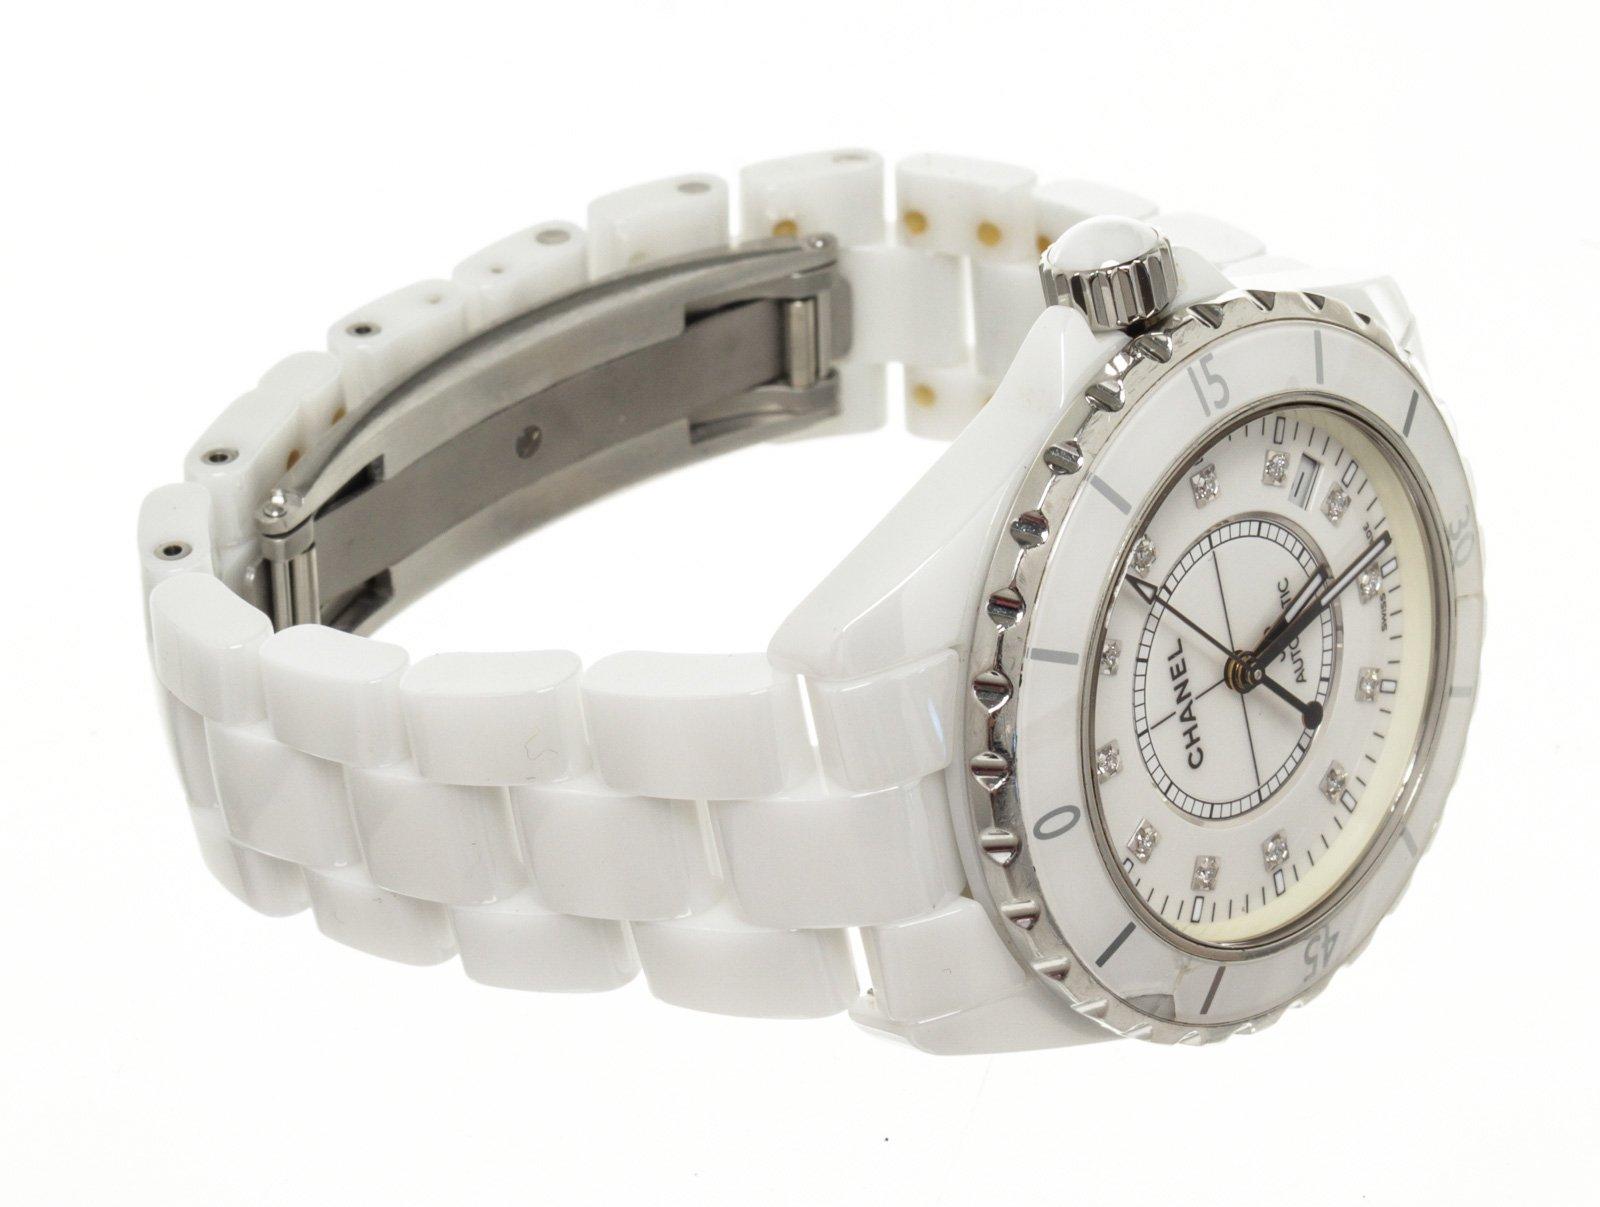 Chanel White Ceramic Watch with gold-tone hardware.

47251MSC